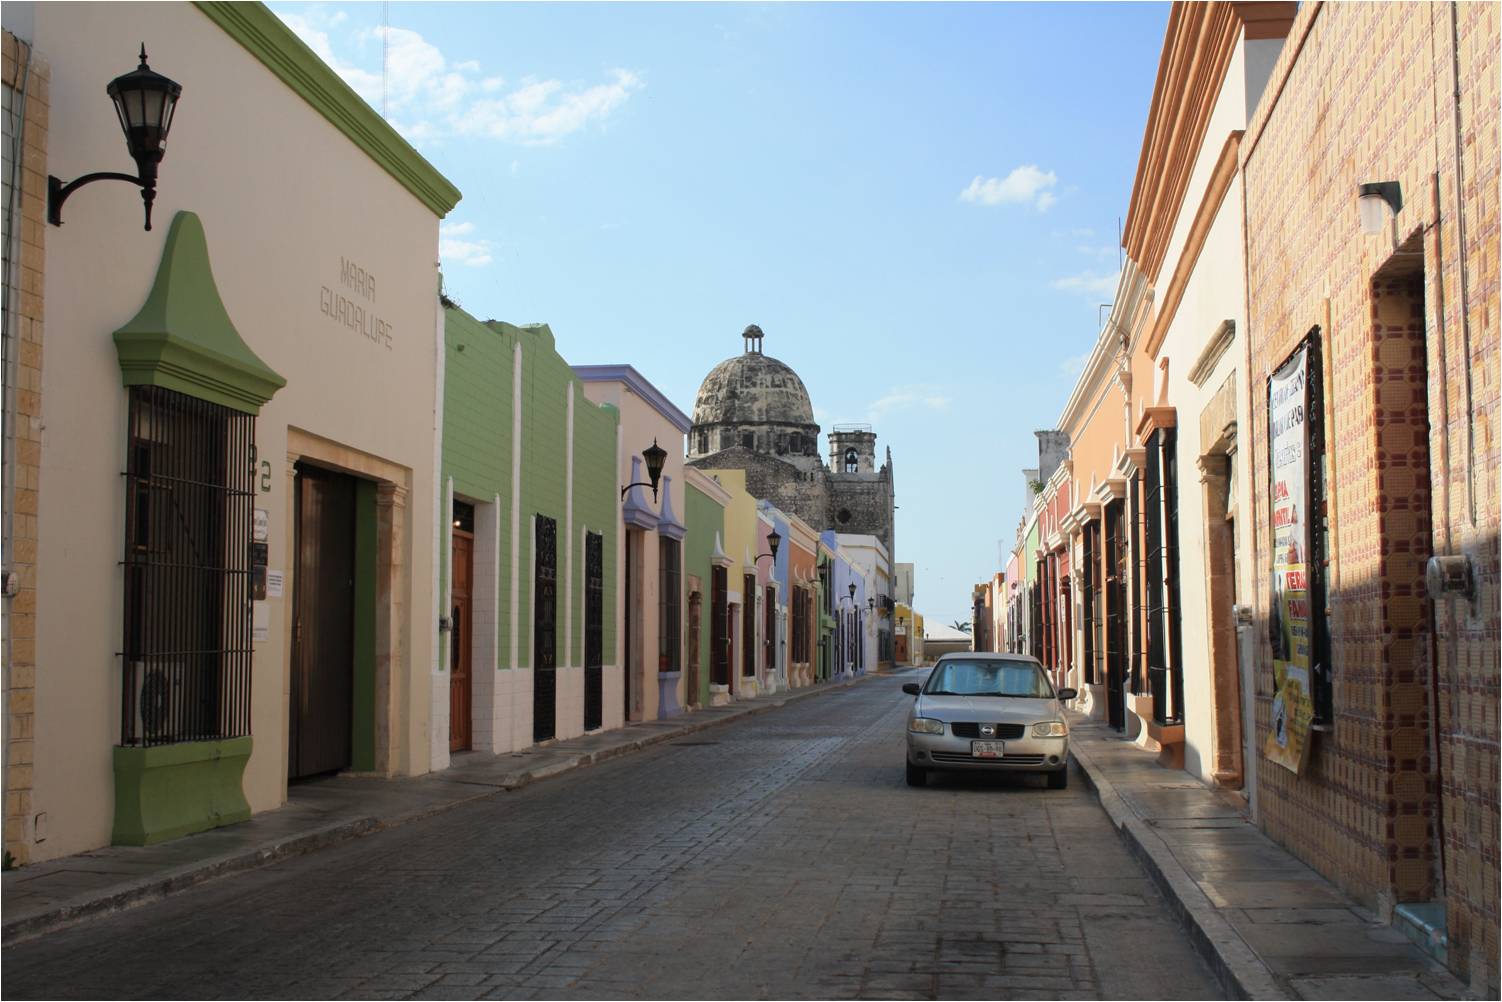 Some of the restored pastel colored buildings